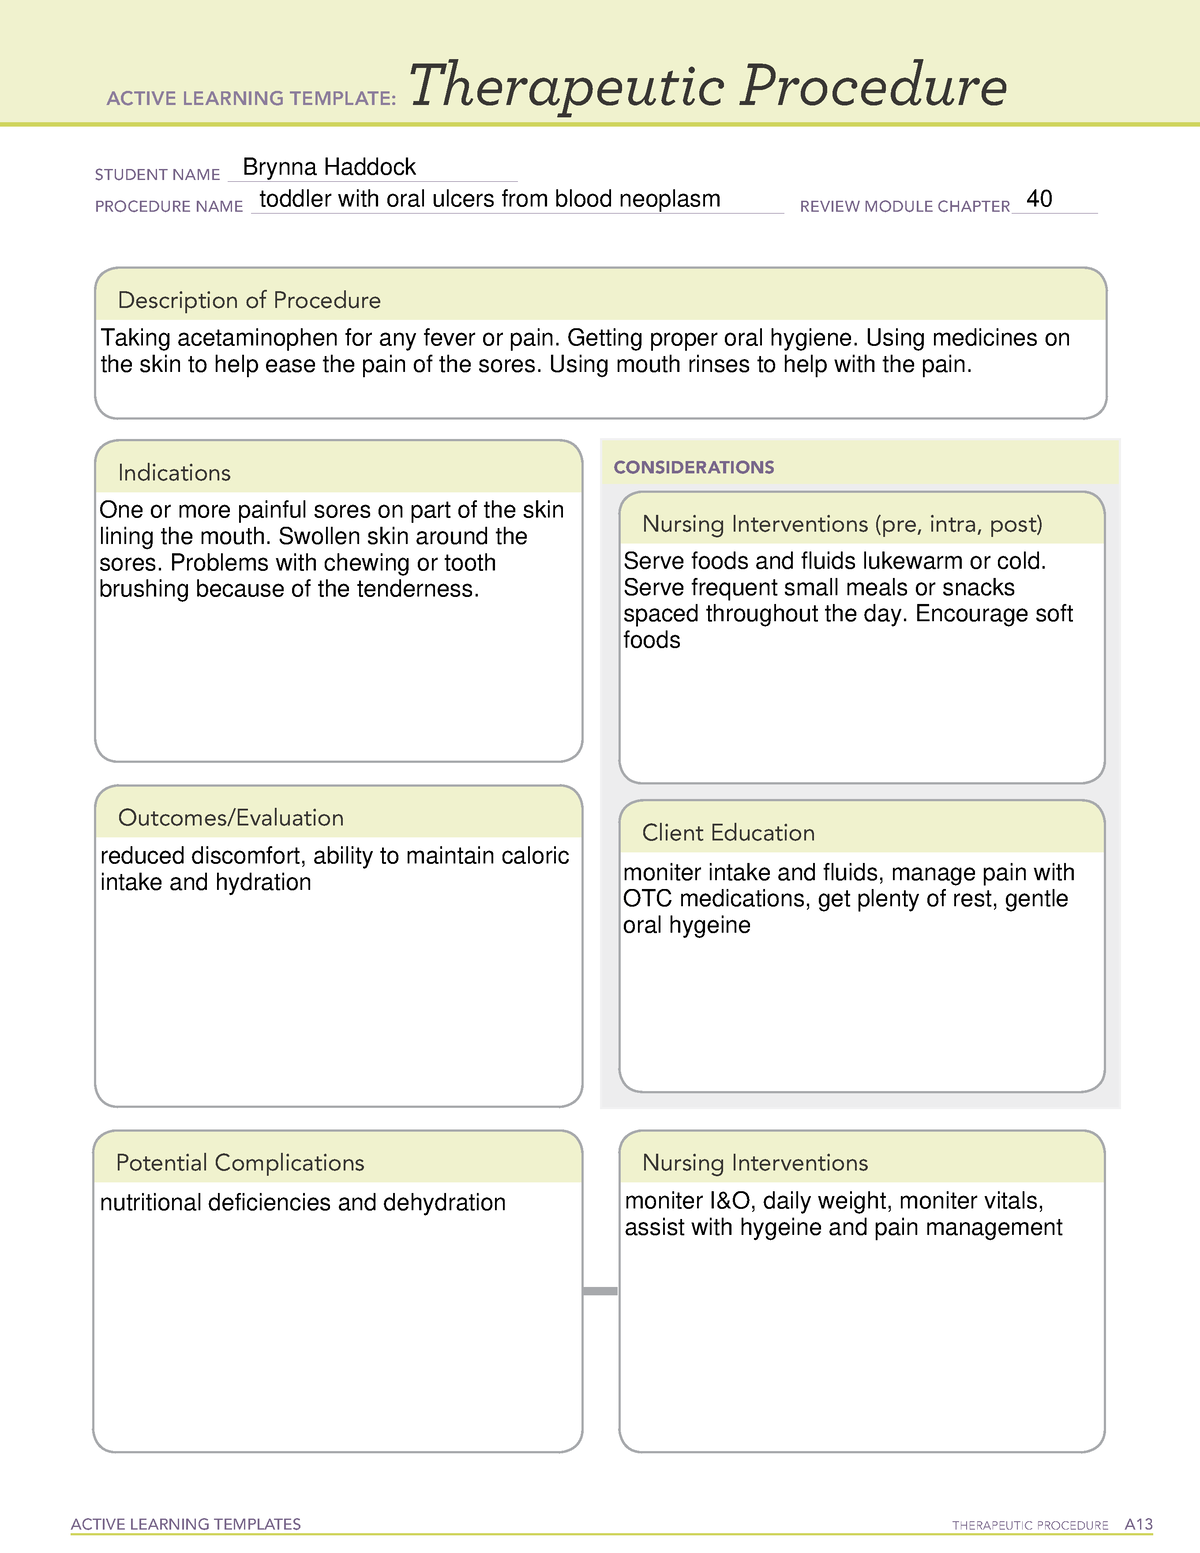 ati-children-remediation-oral-ulcers-active-learning-templates